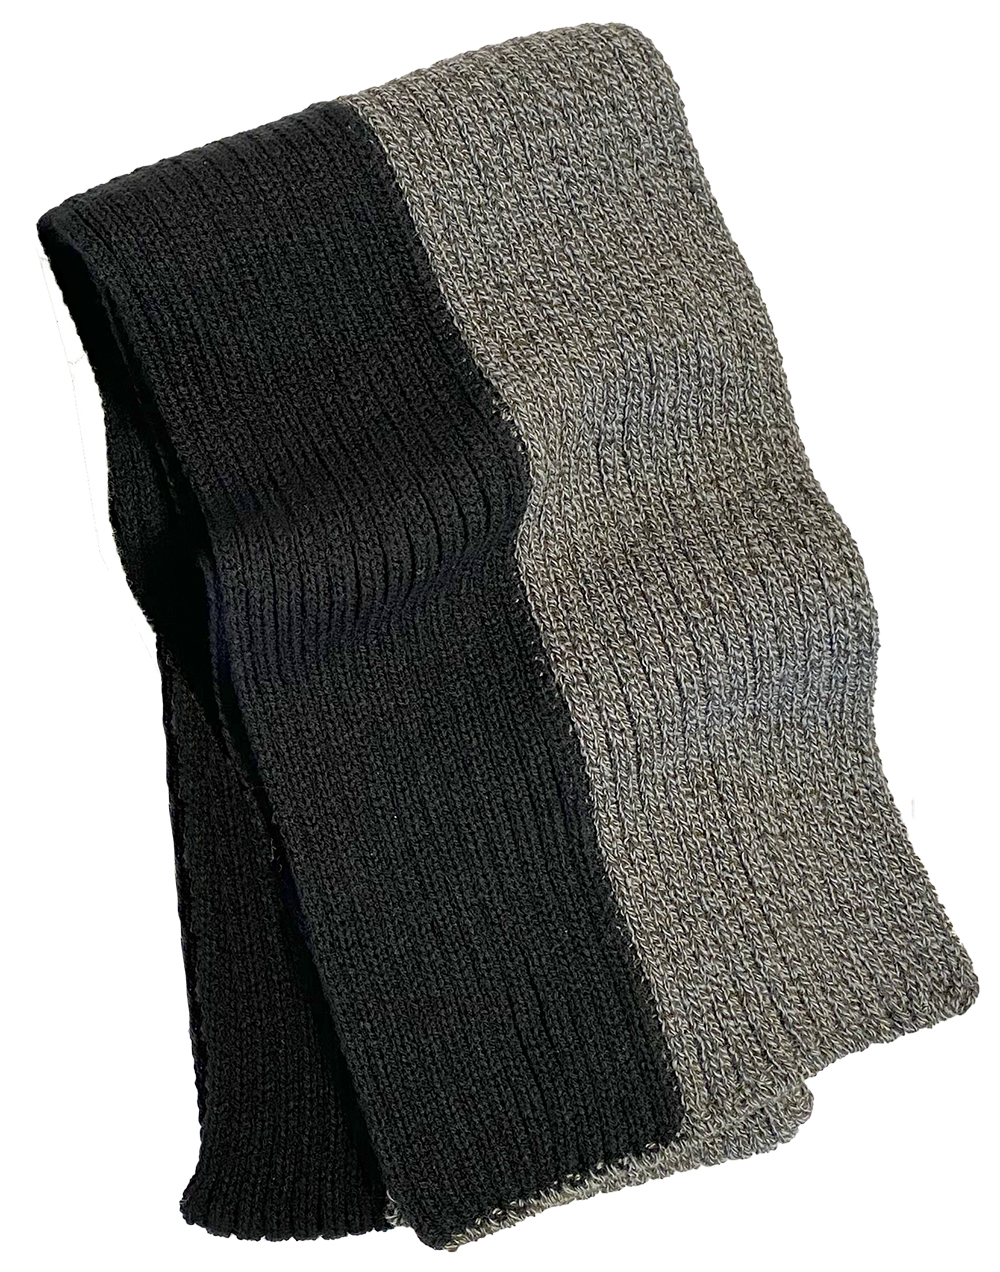 Double Take Knit Scarf with Black Panel - Cold Weather Accessories